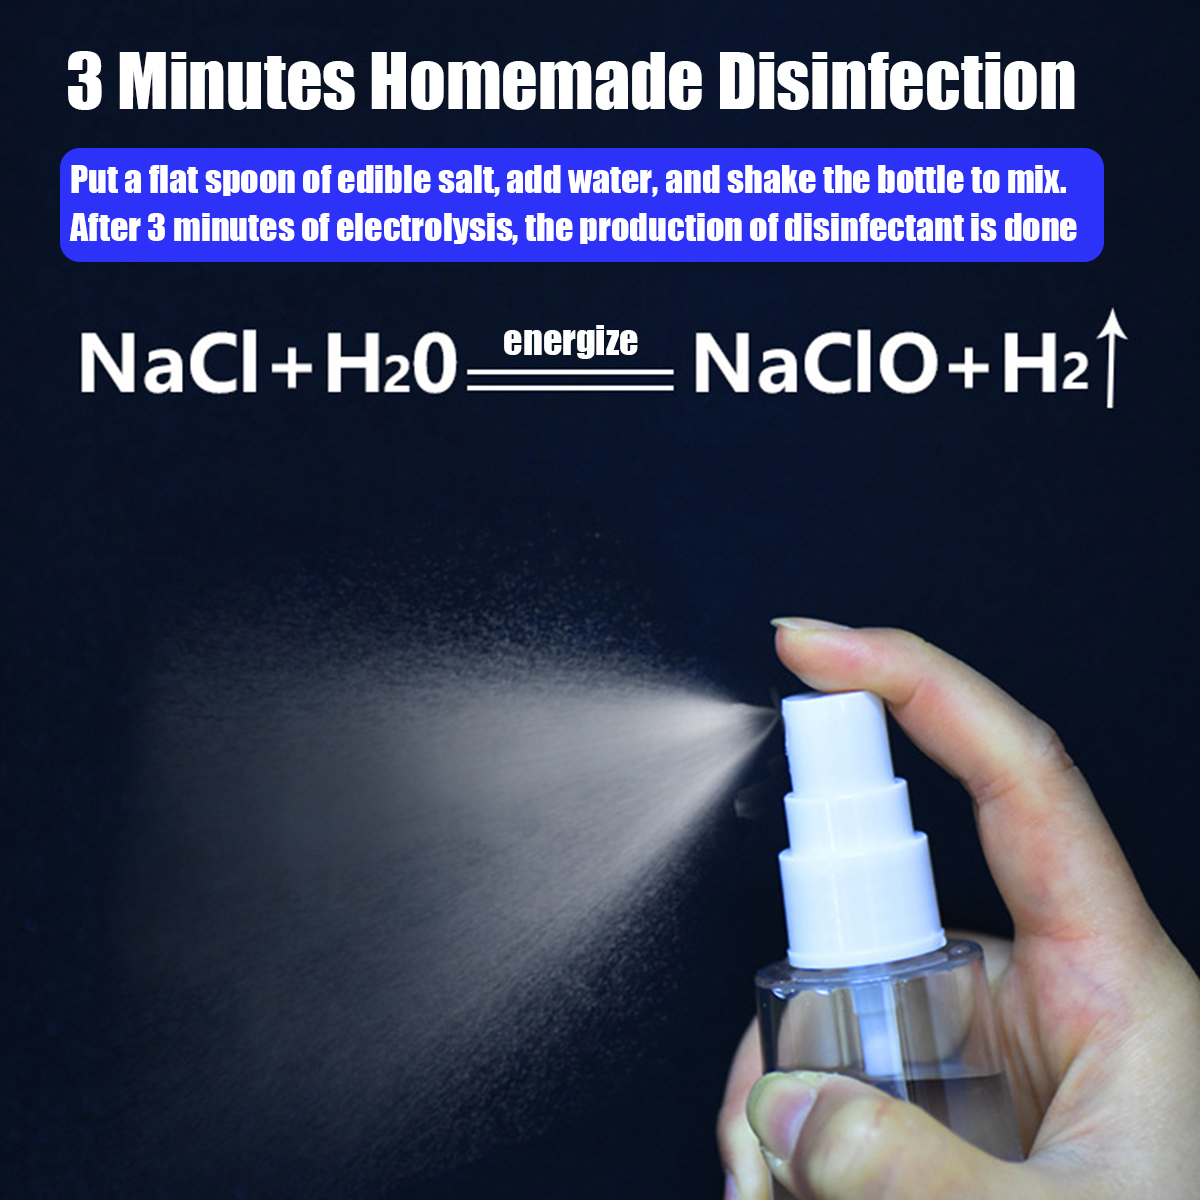 Portable-Sodium-Hypochlorite-Disinfectant-Generator-Disinfection-Water-Maker-1665111-2